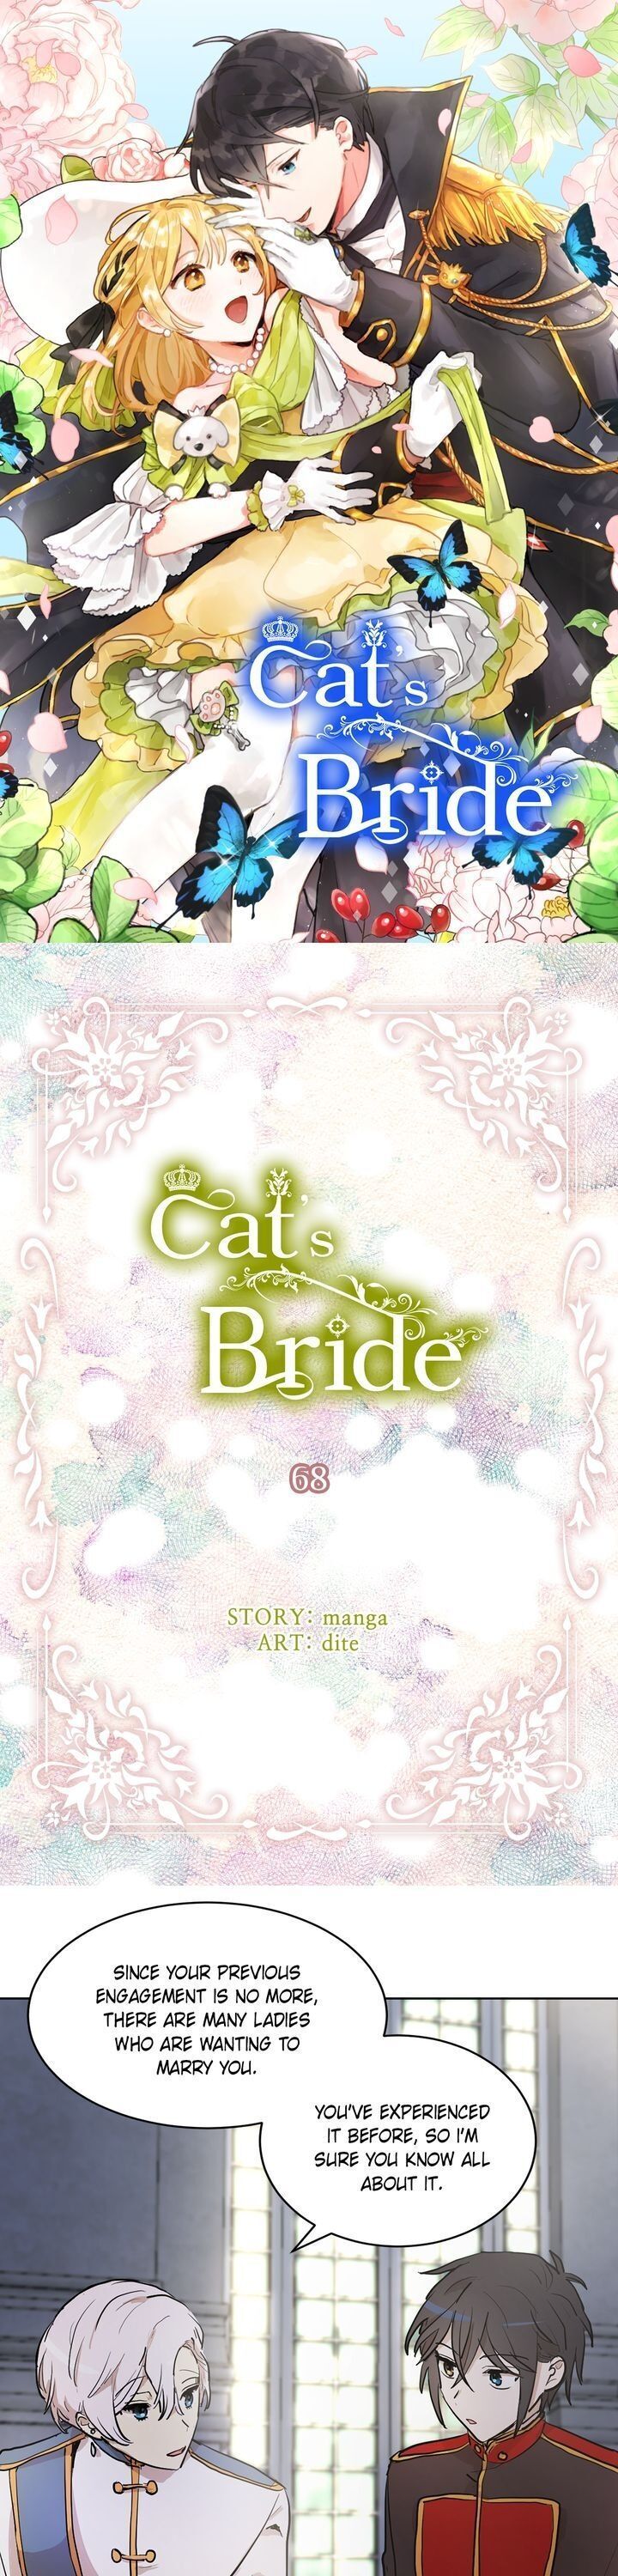 Cat's Bride Chapter 68 page 1